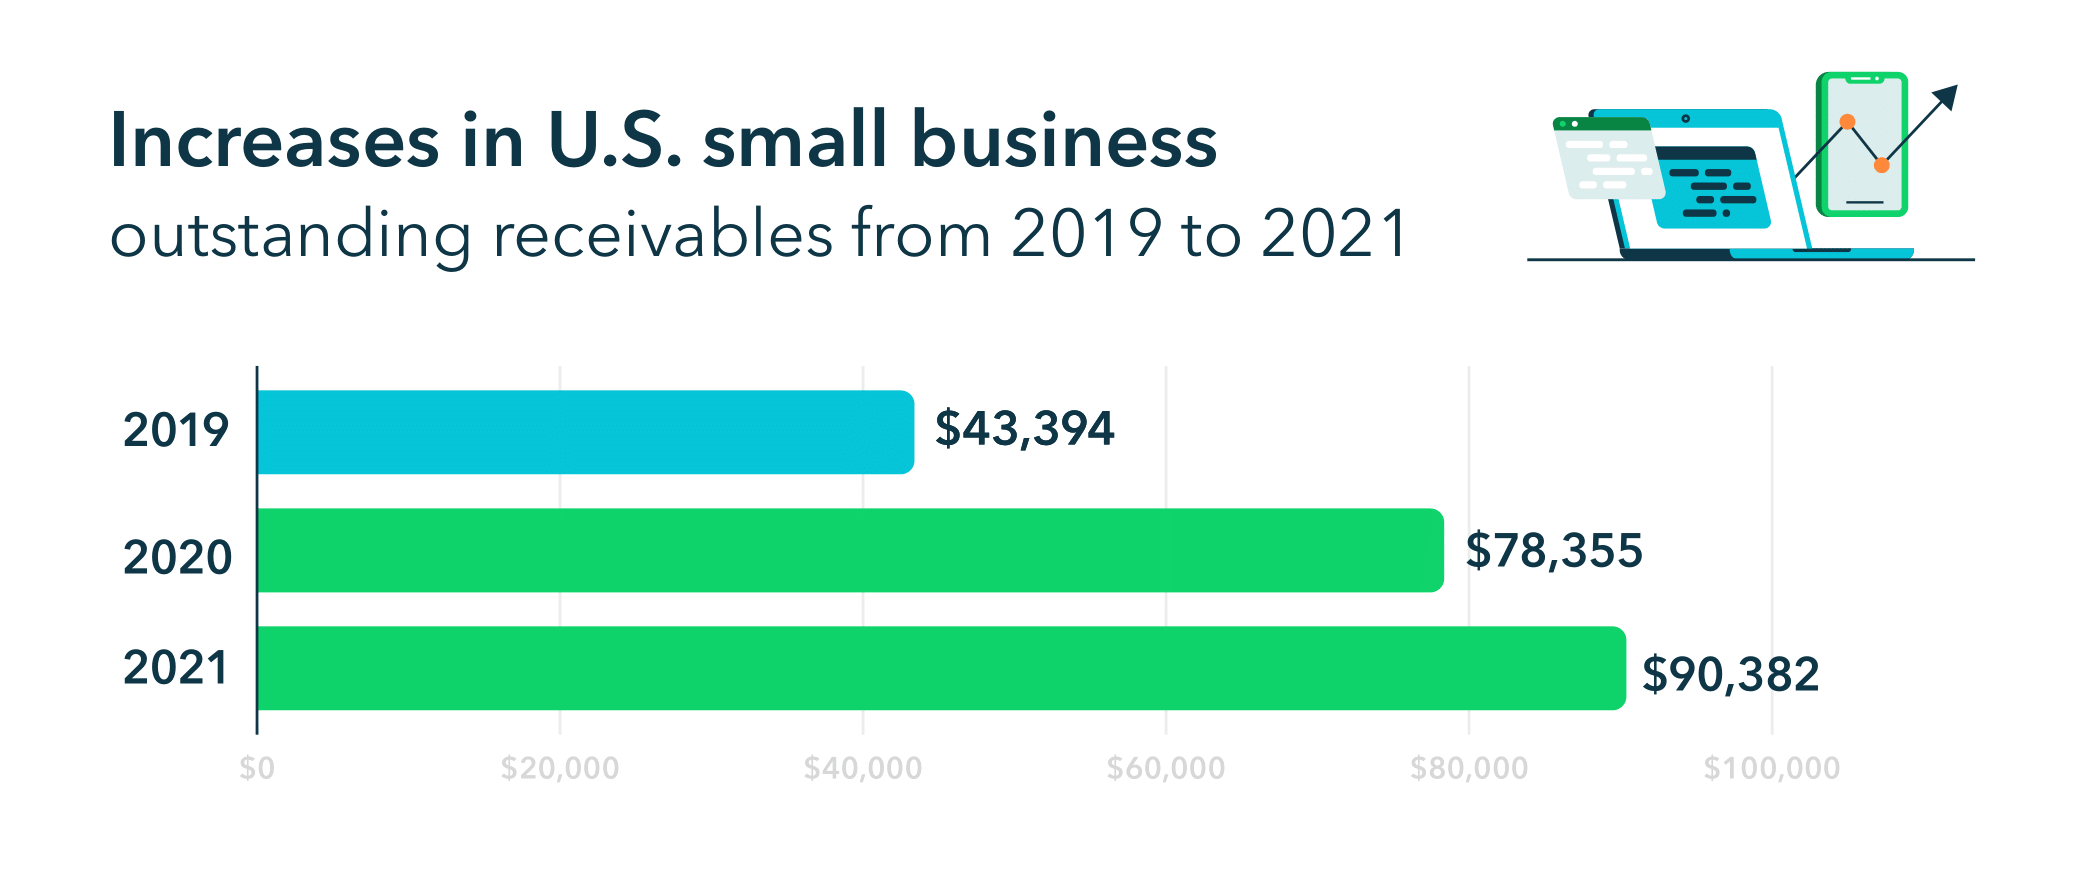 Increases in US small business outstanding receivables from 2019 to 2021.